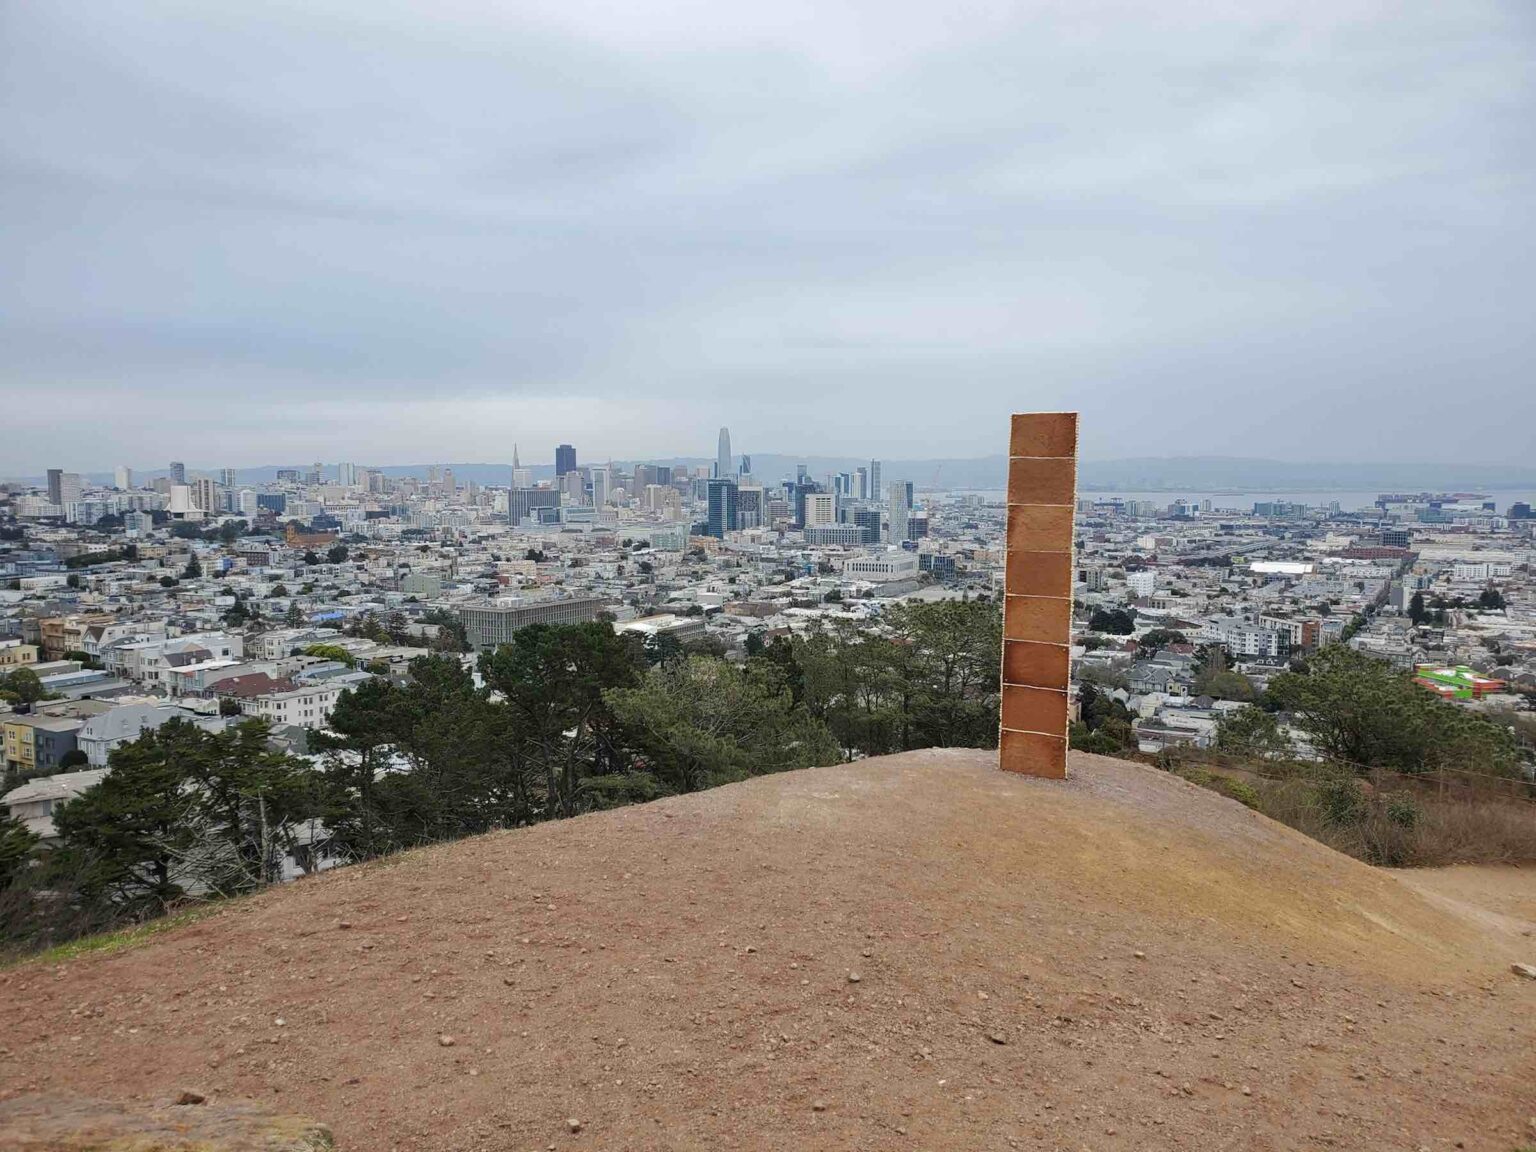 Mysterious monoliths have appeared in random places around the world in late 2020. Here's one monolith that provided a sweet treat at a San Francisco park.